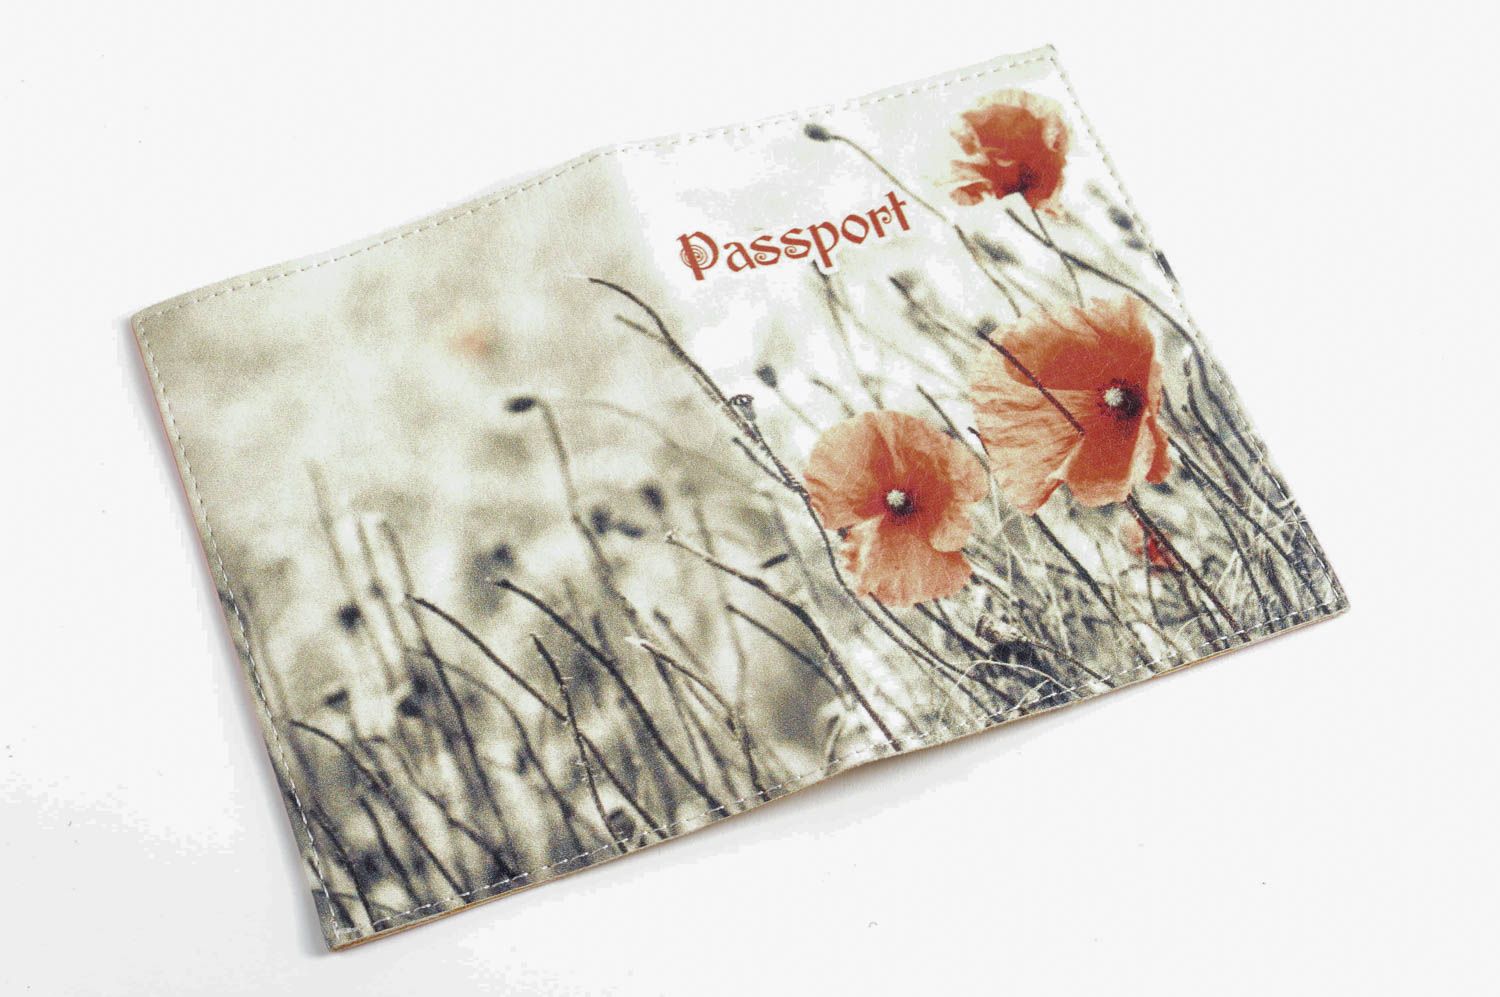 Unusual handmade leather passport cover handmade accessories small gifts photo 5